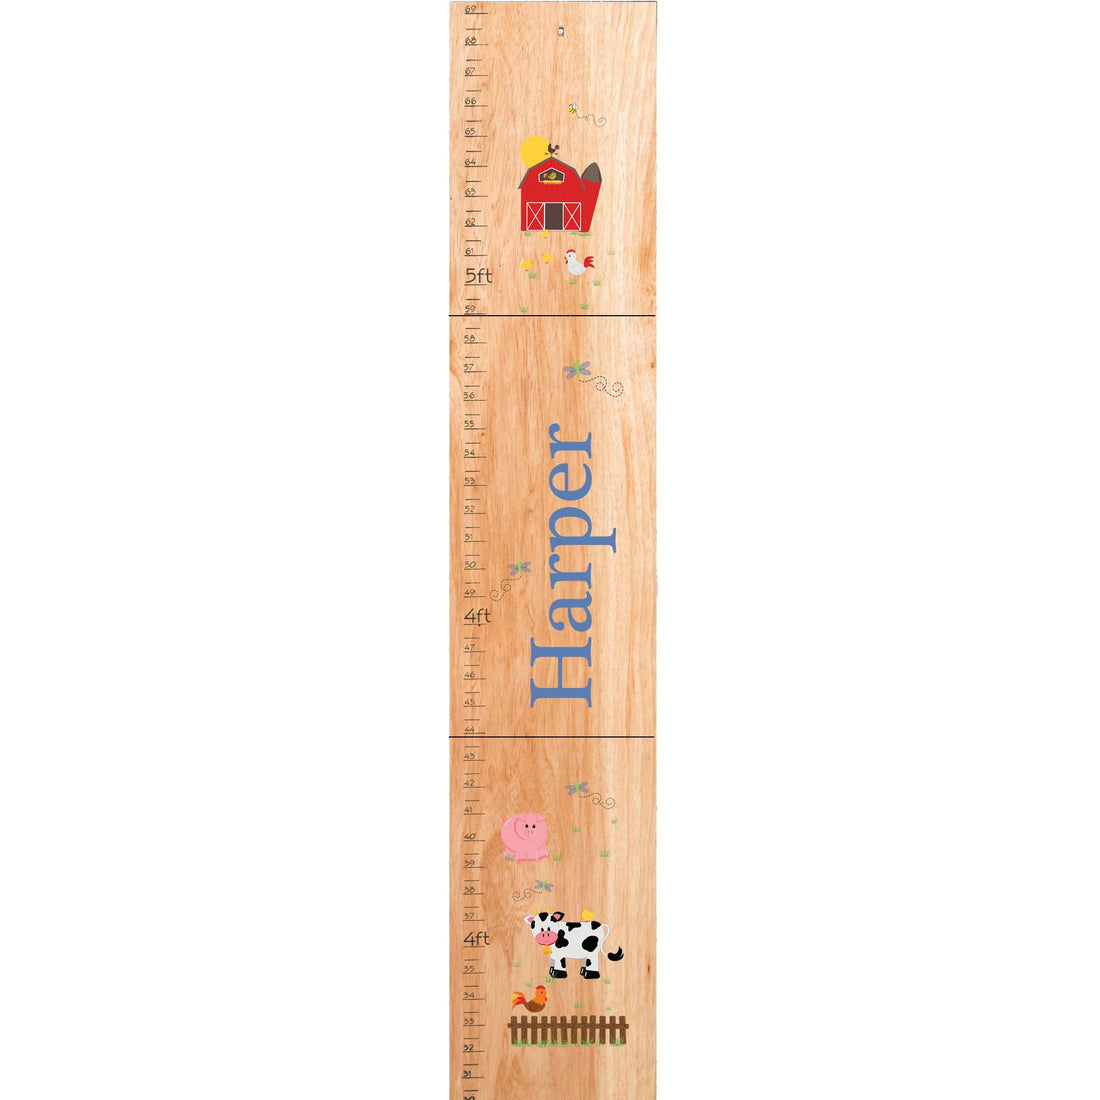 Personalized Natural Growth Chart With Barnyard Primary Design